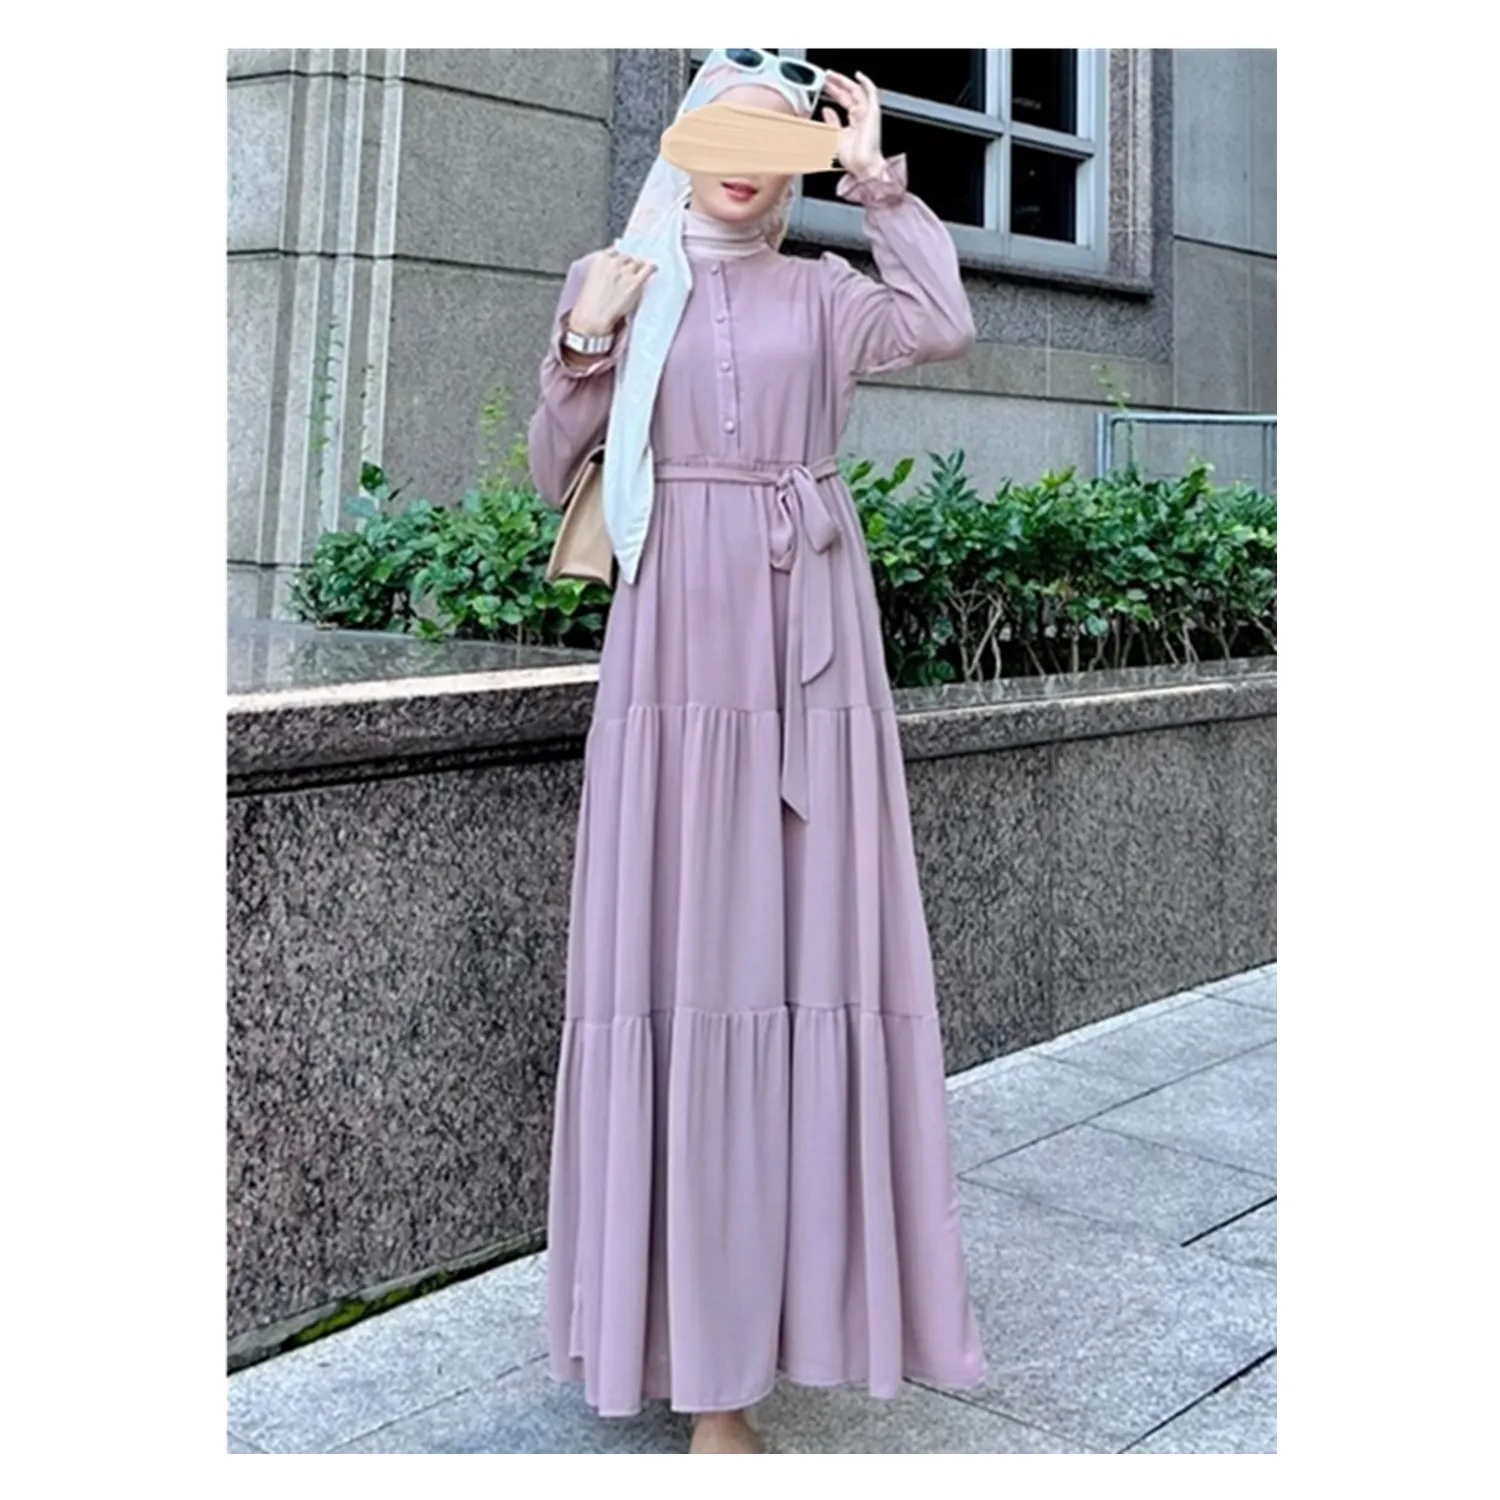 SIPO Turkish Clothing 2022 New Designs Chiffon Pale Purple Crinkle Tiered Abaya Dress With Belt Functional Button For Women